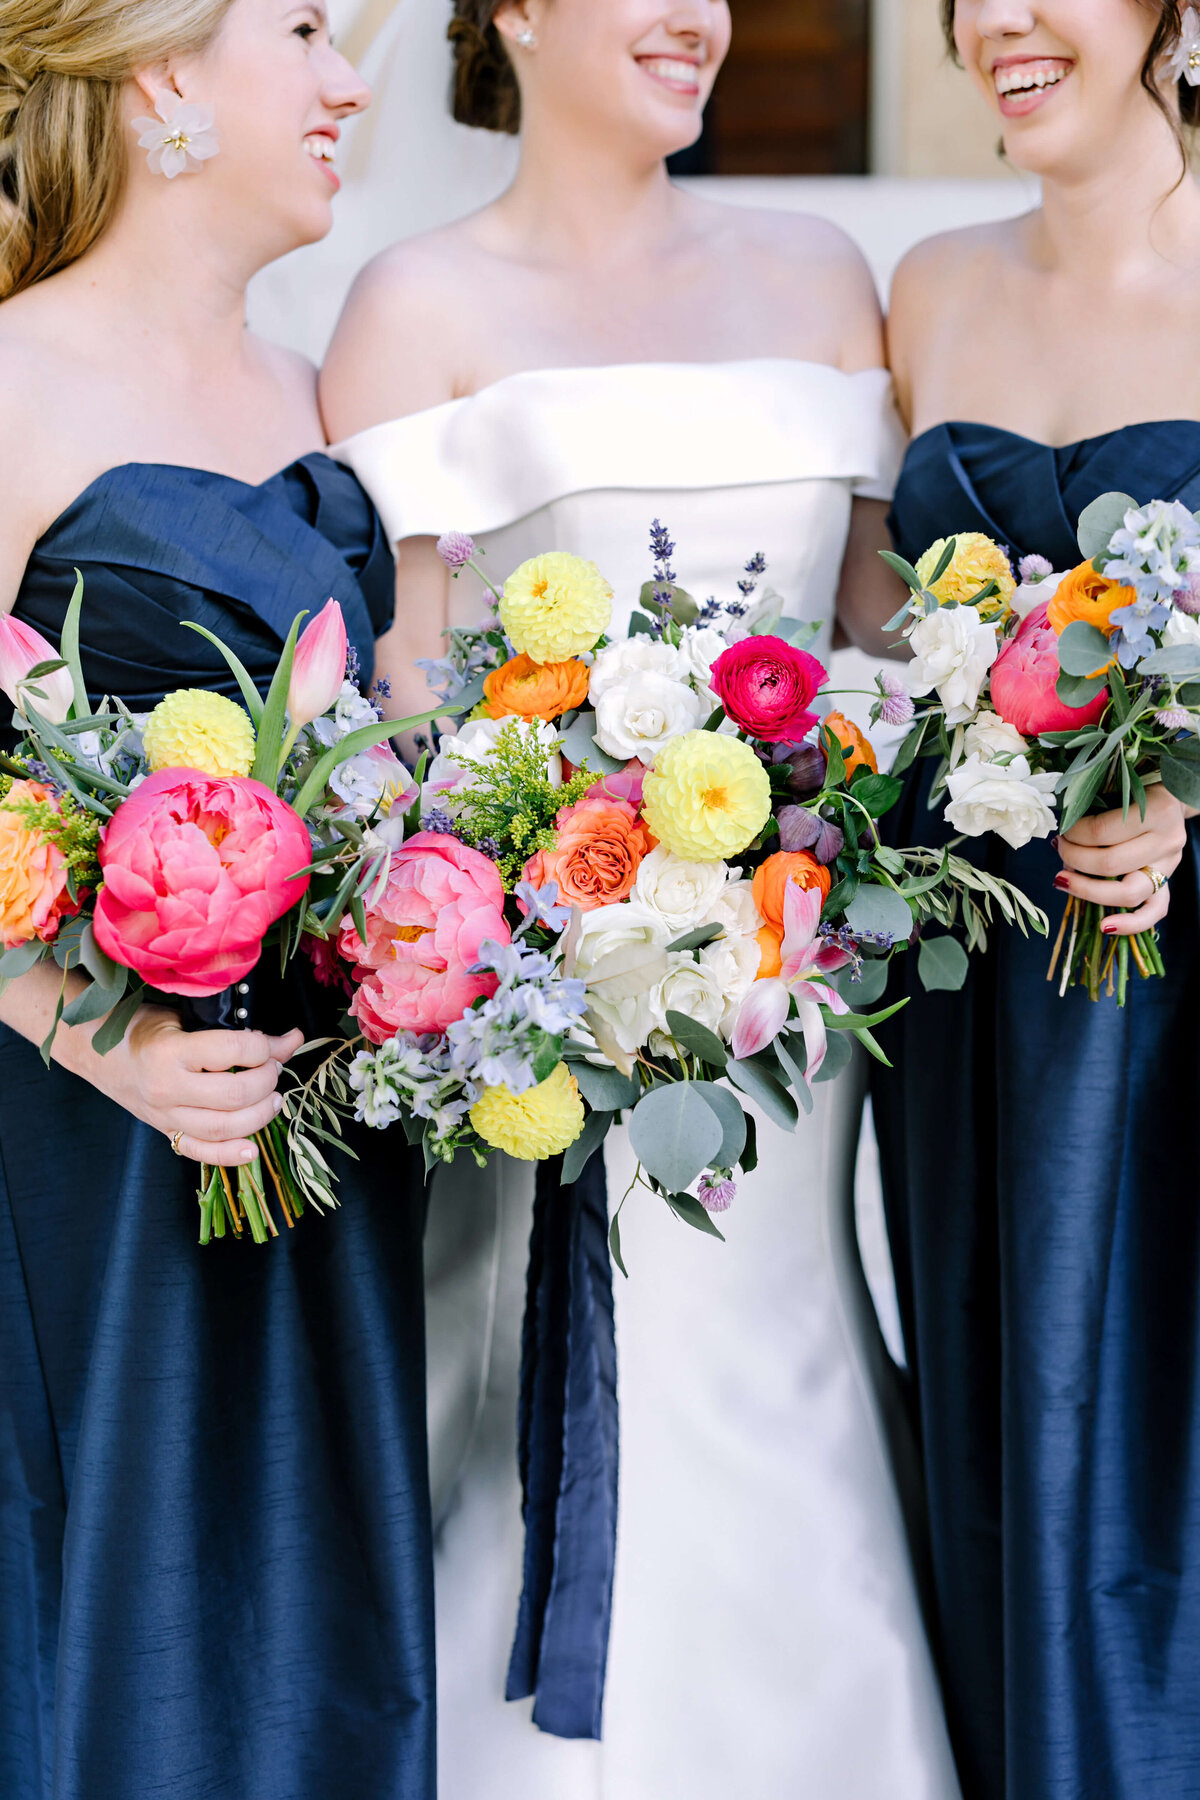 Navy satin bridesmaids dresses with colorful bouquets